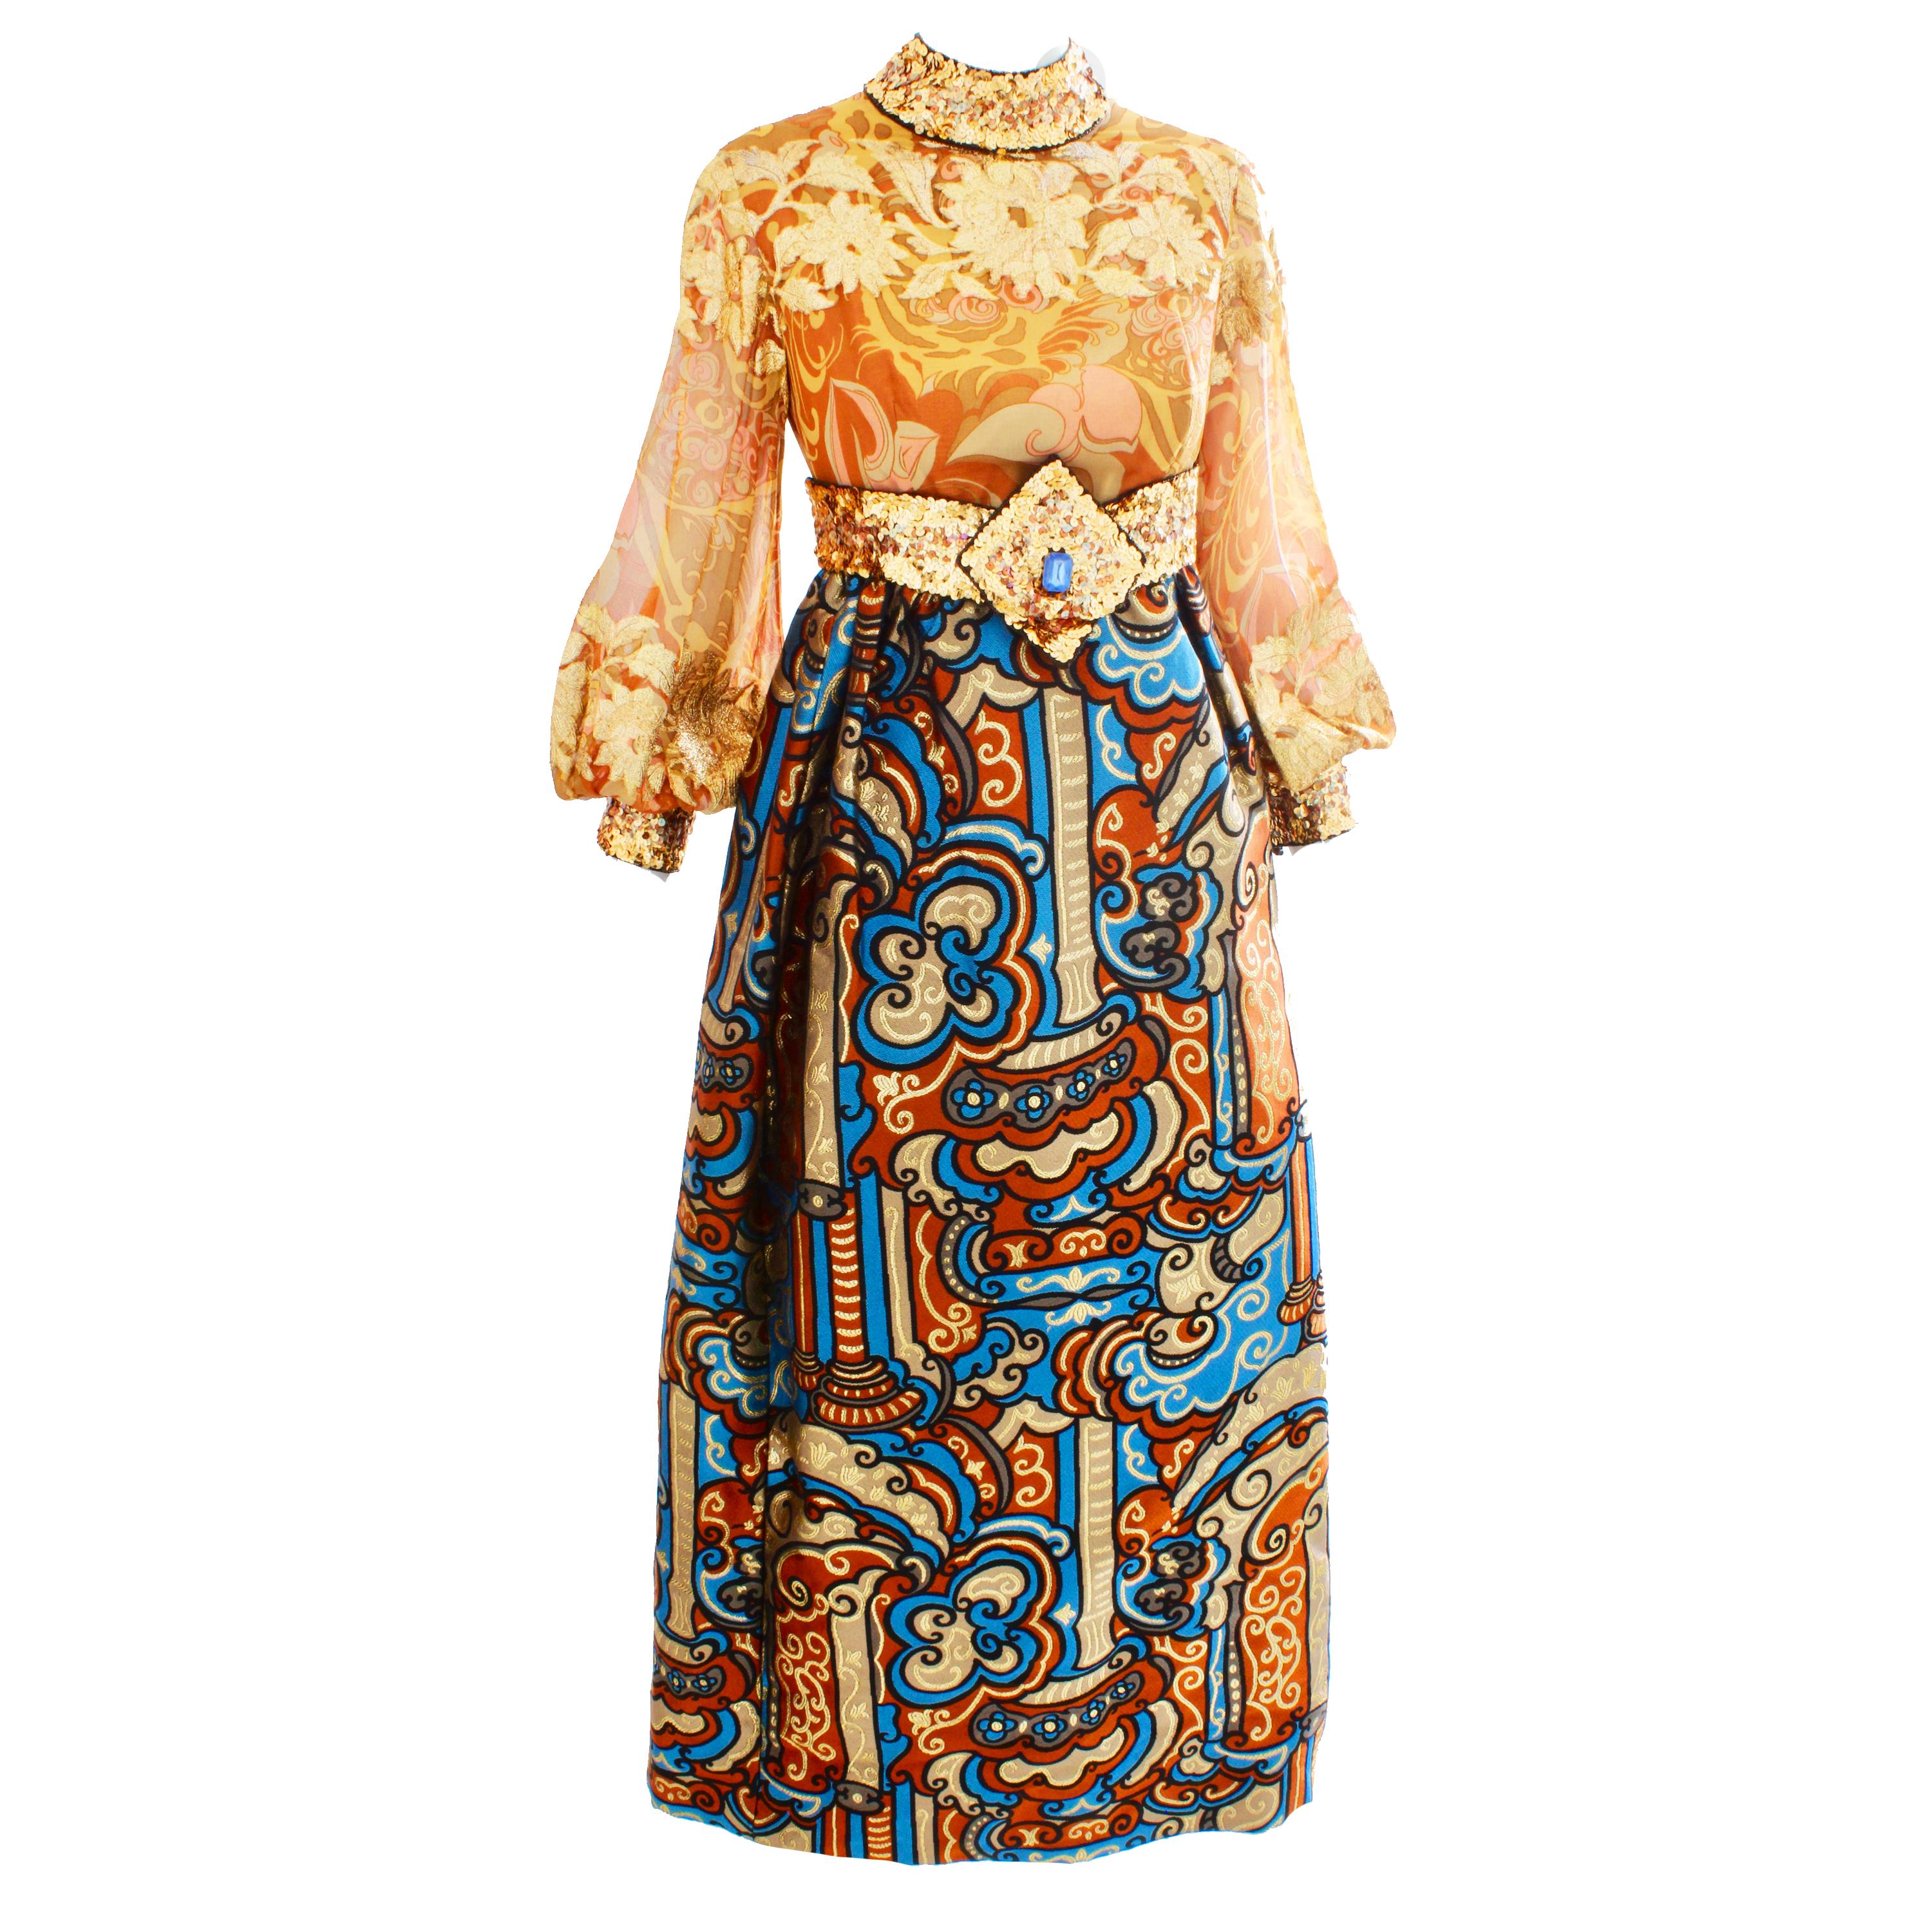 A timeless Burke Amey evening gown, likely made in the early 70s.  Made from gold silk, the bodice features an abstract floral pattern with embroidered metallic thread and bishop sleeves that fasten with silk covered buttons.  The attached skirt is